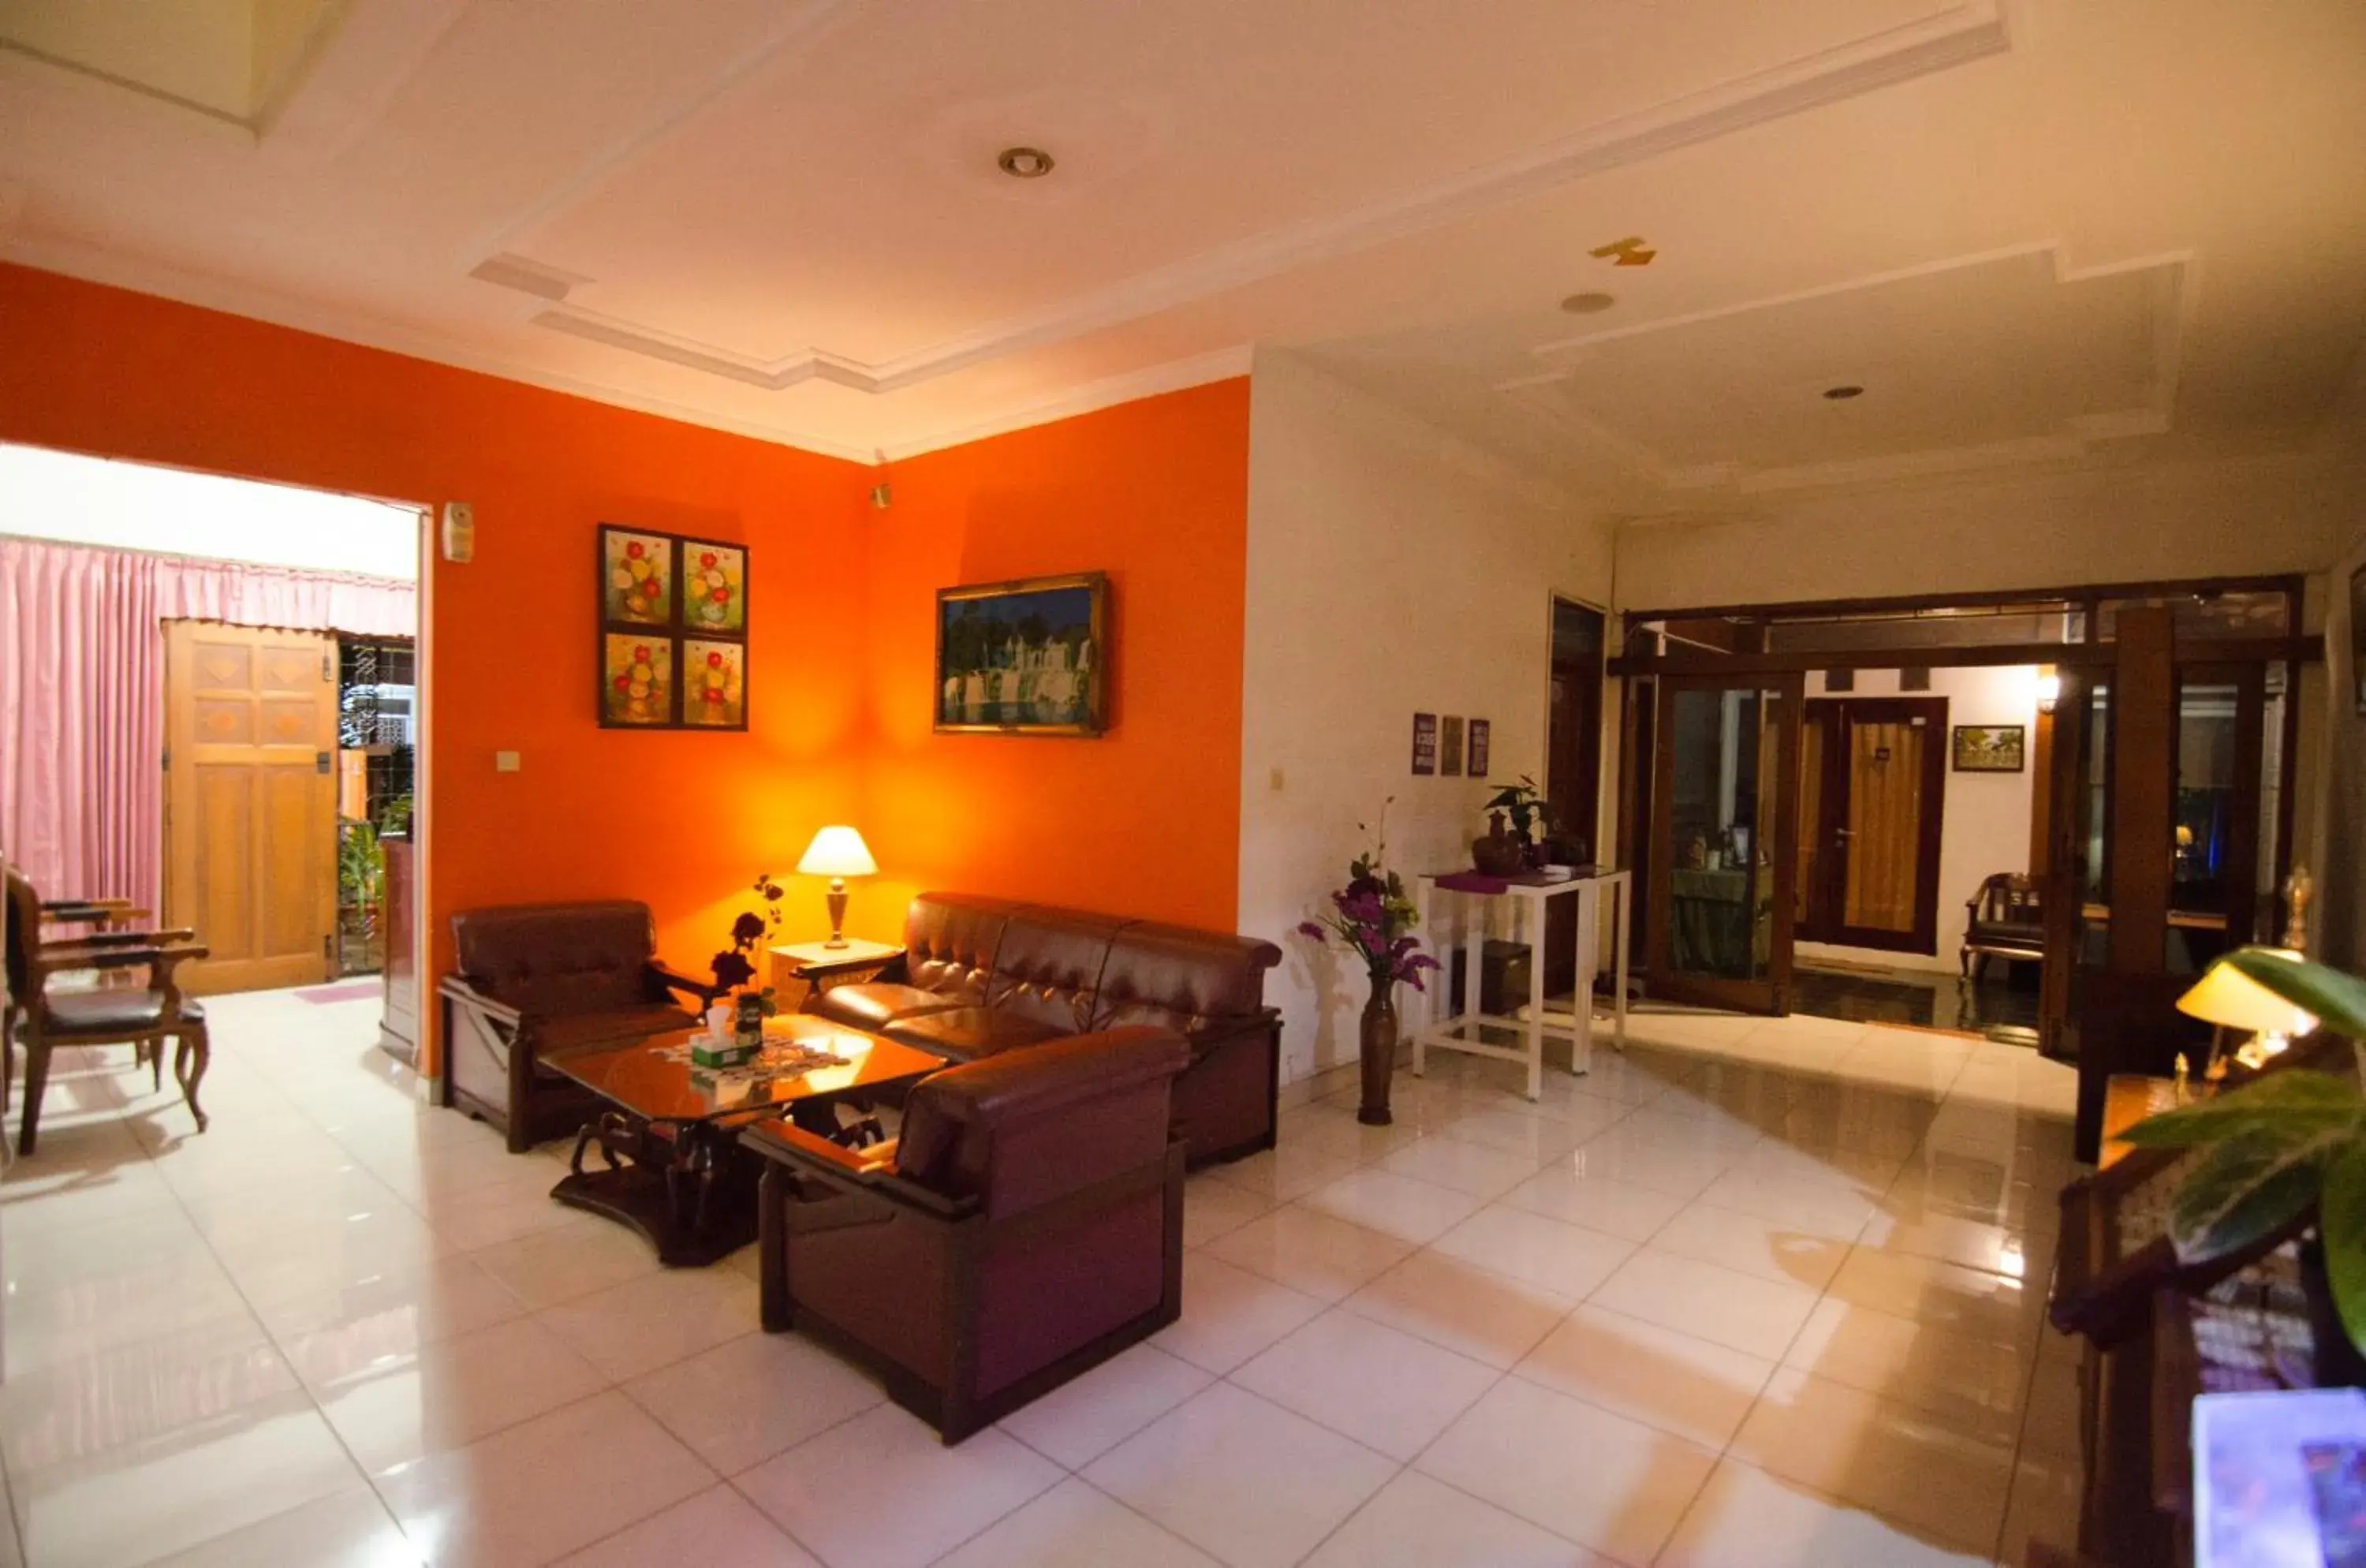 Area and facilities, Lobby/Reception in Fora Guest House Taman Lingkar